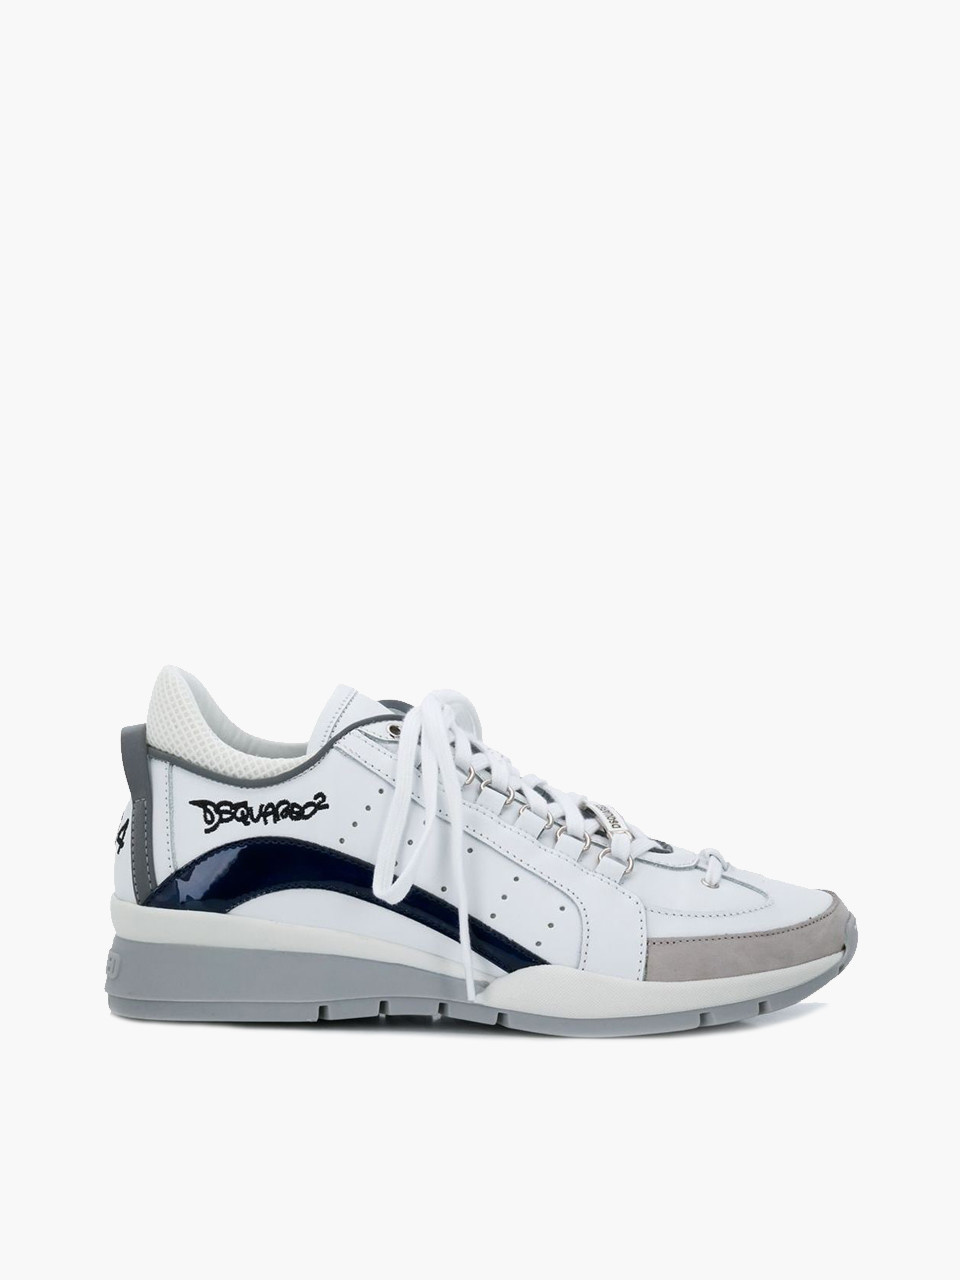 dsquared sneakers nederland